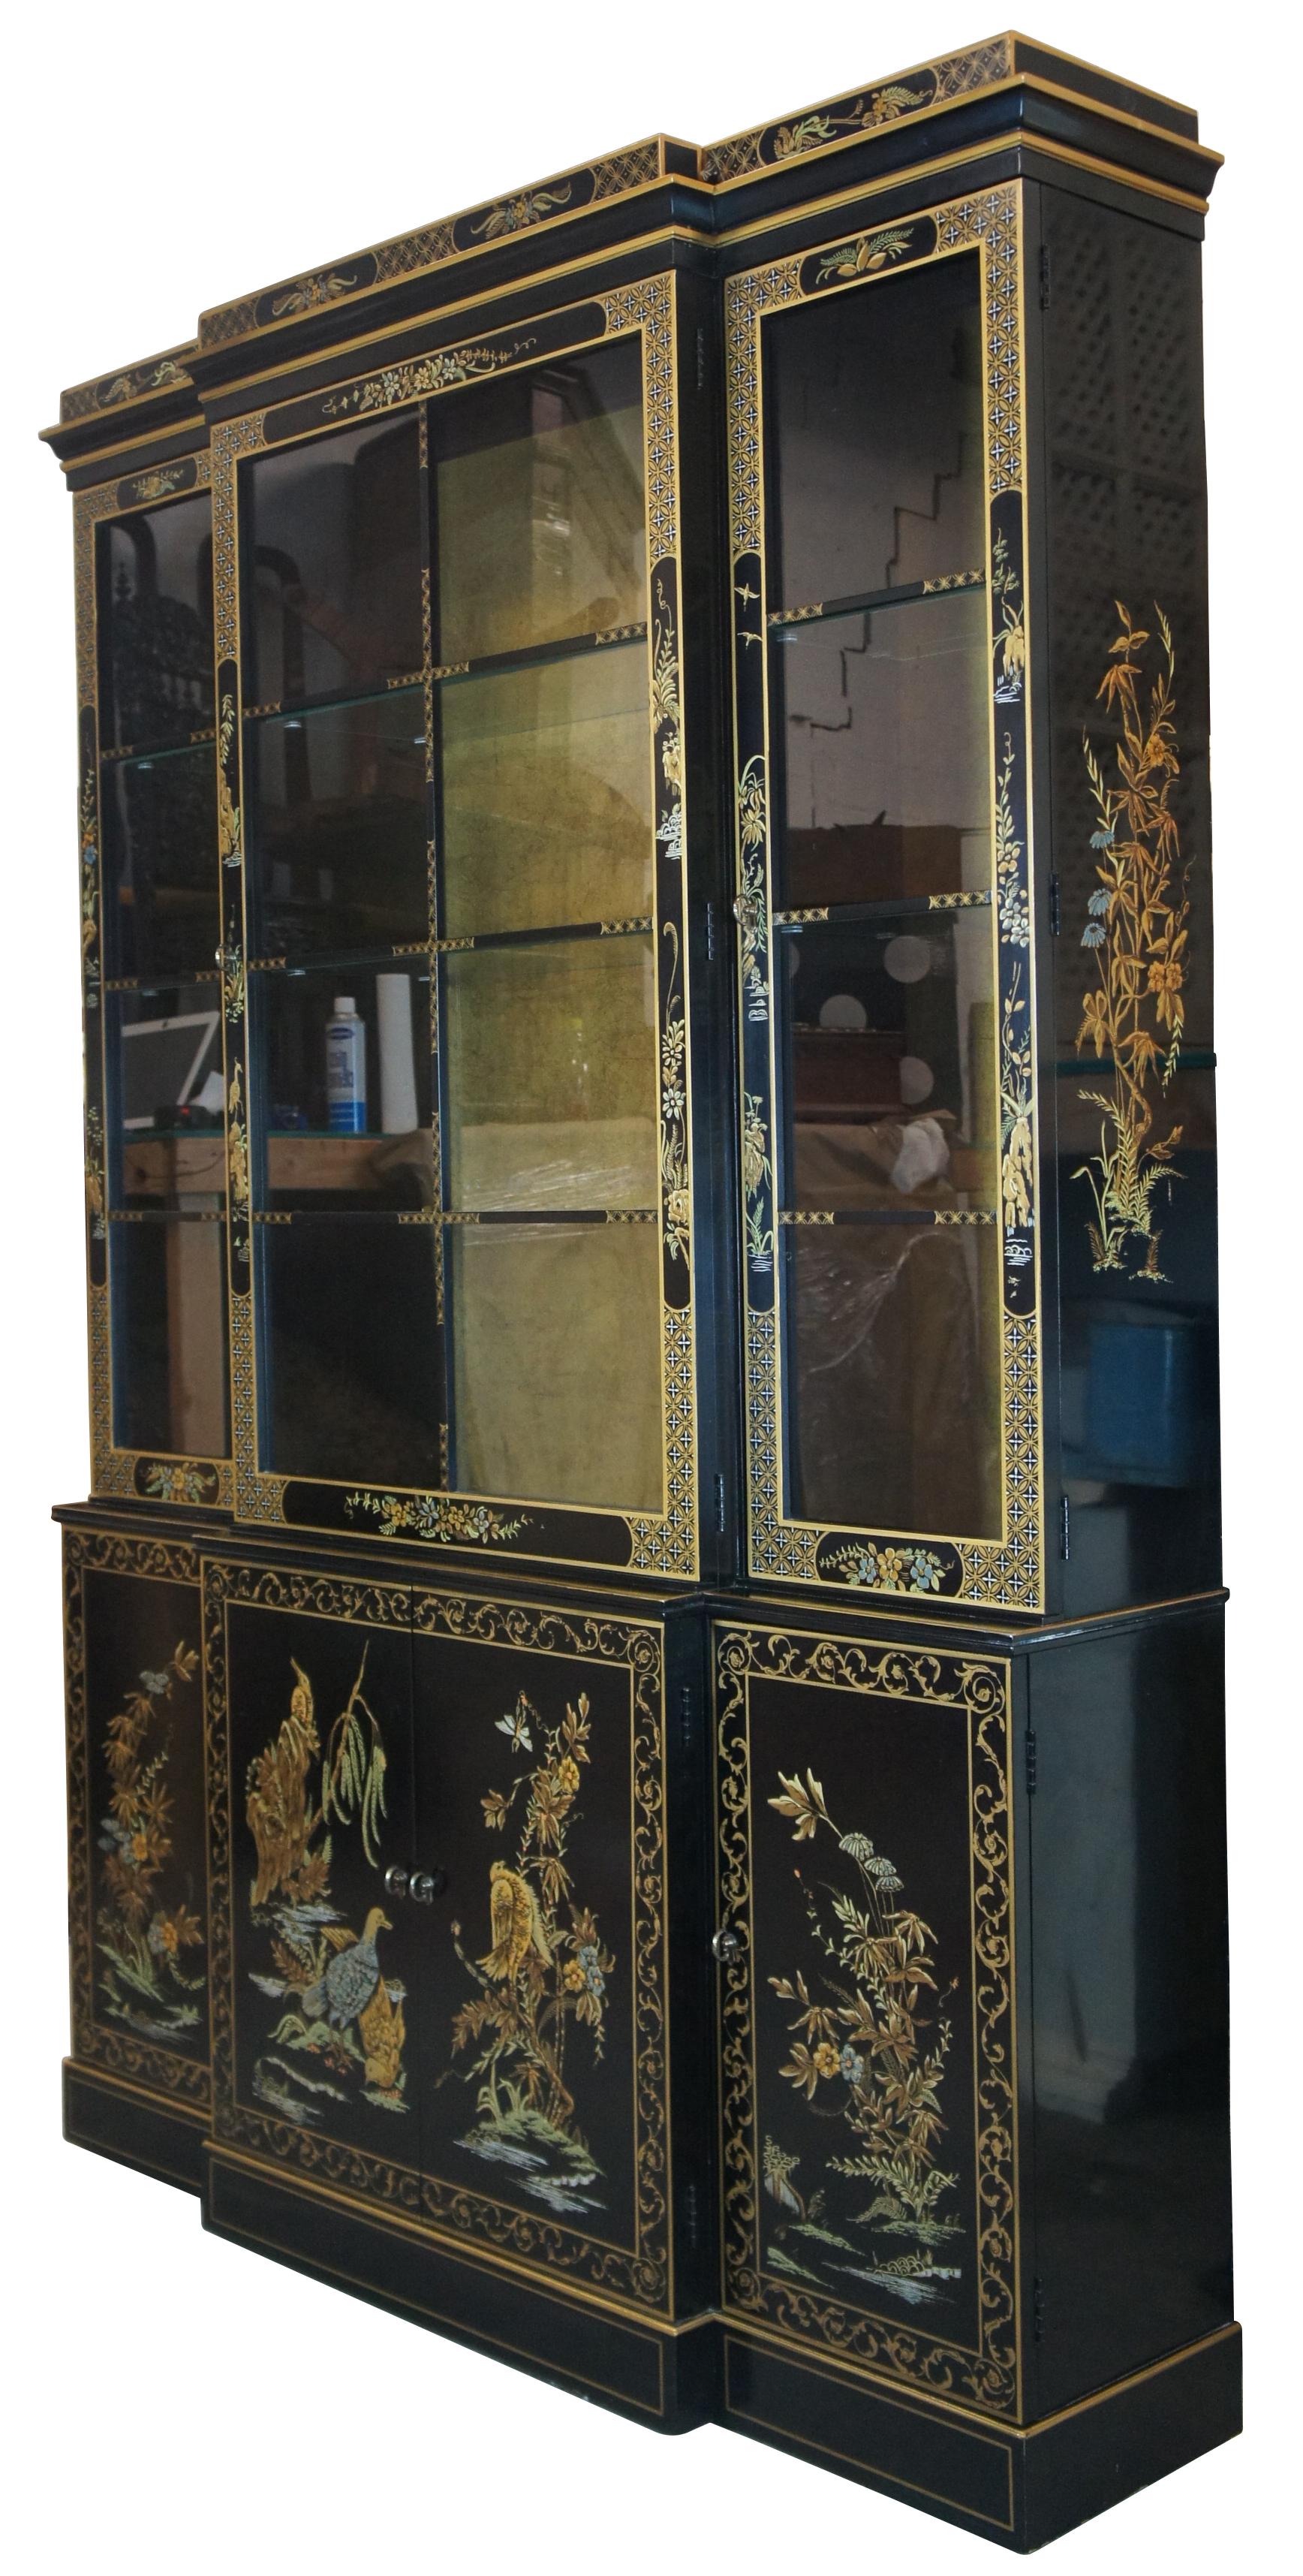 Drexel Heritage Et Cetera display cabinet 582-536, circa 1978. Features Chinoiserie japanned (black lacquer) hand painted motif with gold detail showing a landscape of florals / flowers, animals / birds, and butterfly. The cabinet is lit from above